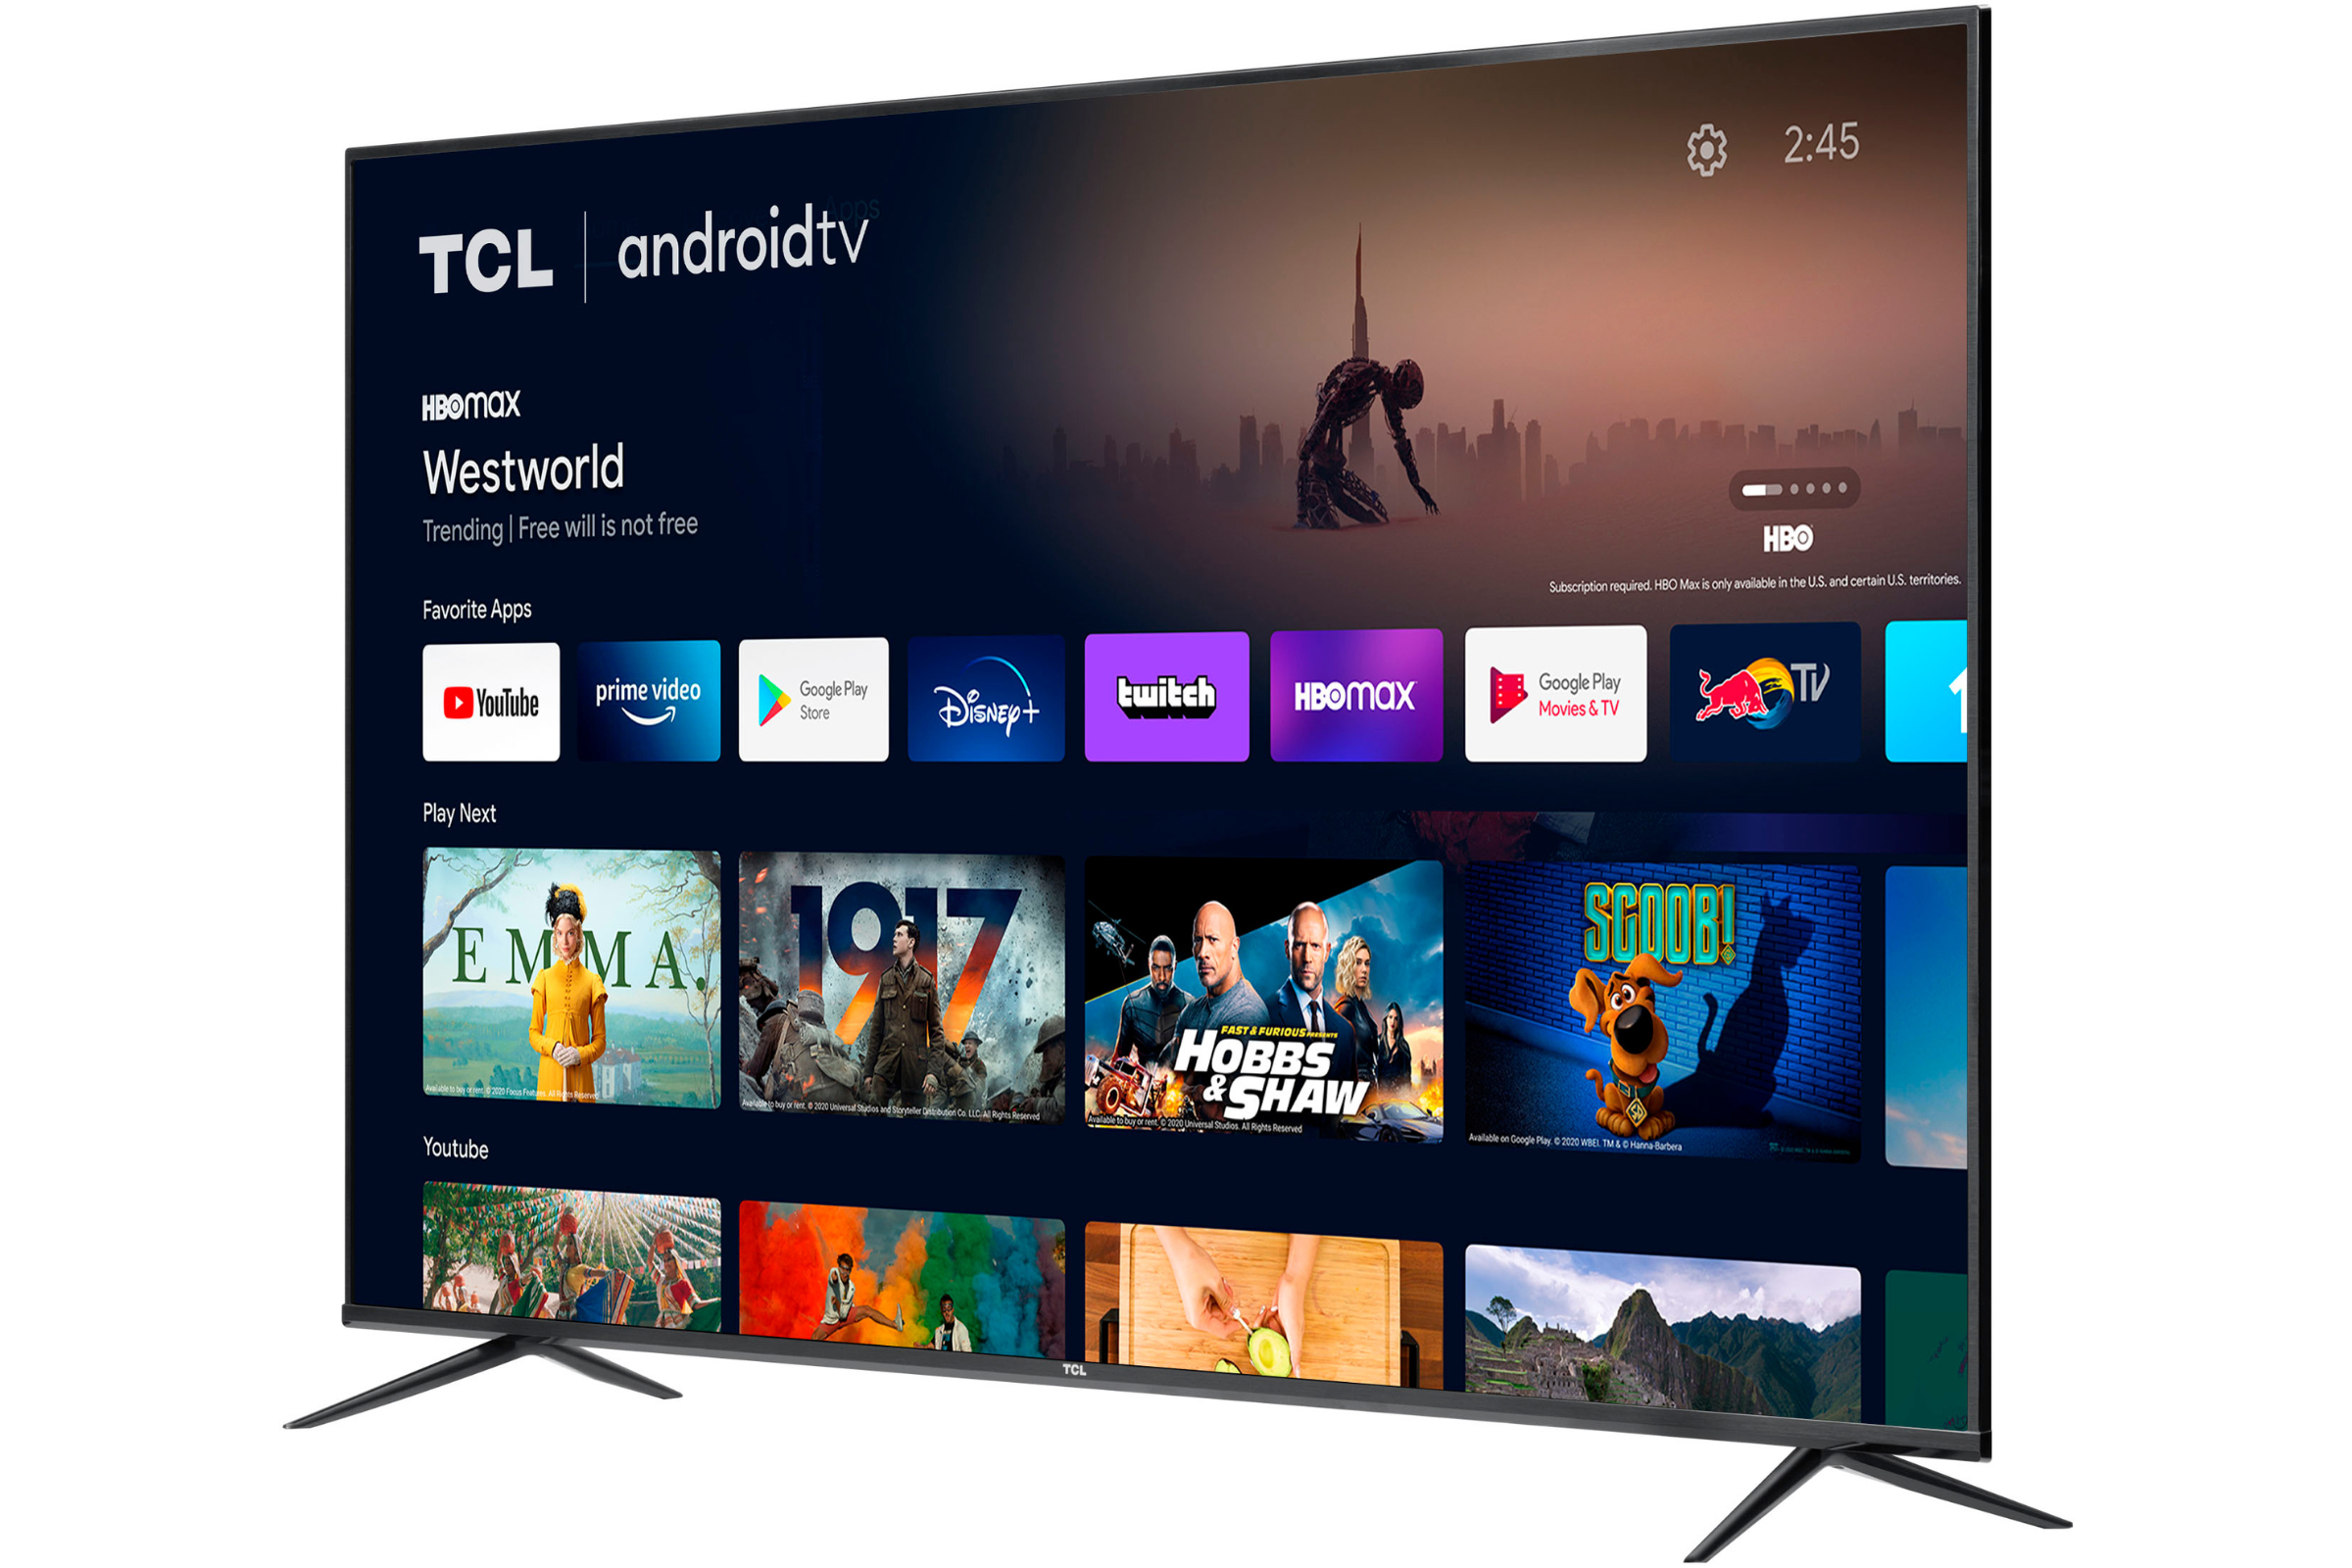 TCL's 70-inch smart TV is now just $400 in this flash sale